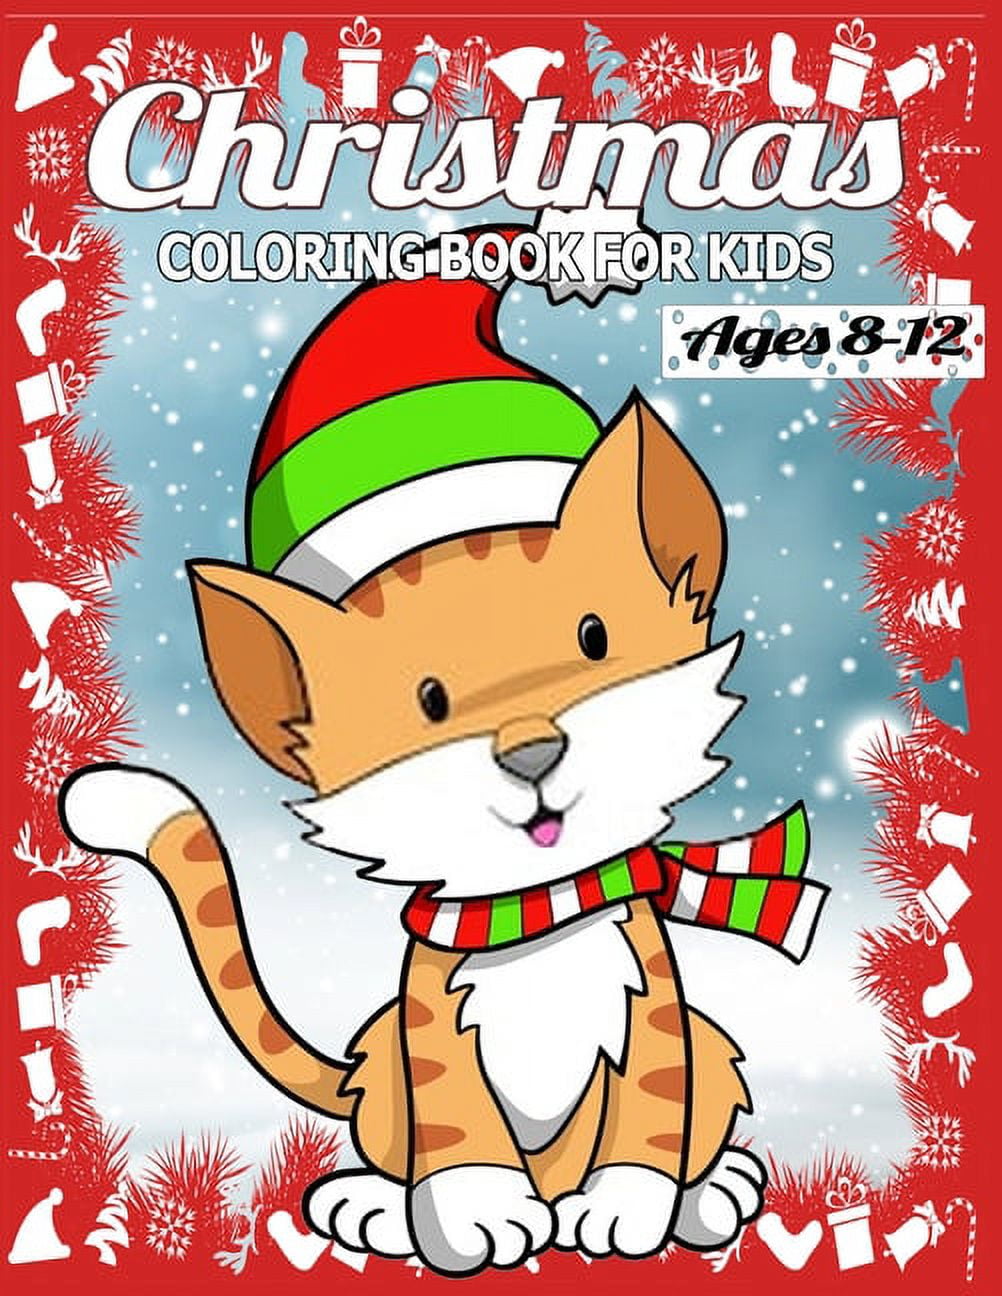 cat coloring books for kids ages 8-12: beautiful photos 50